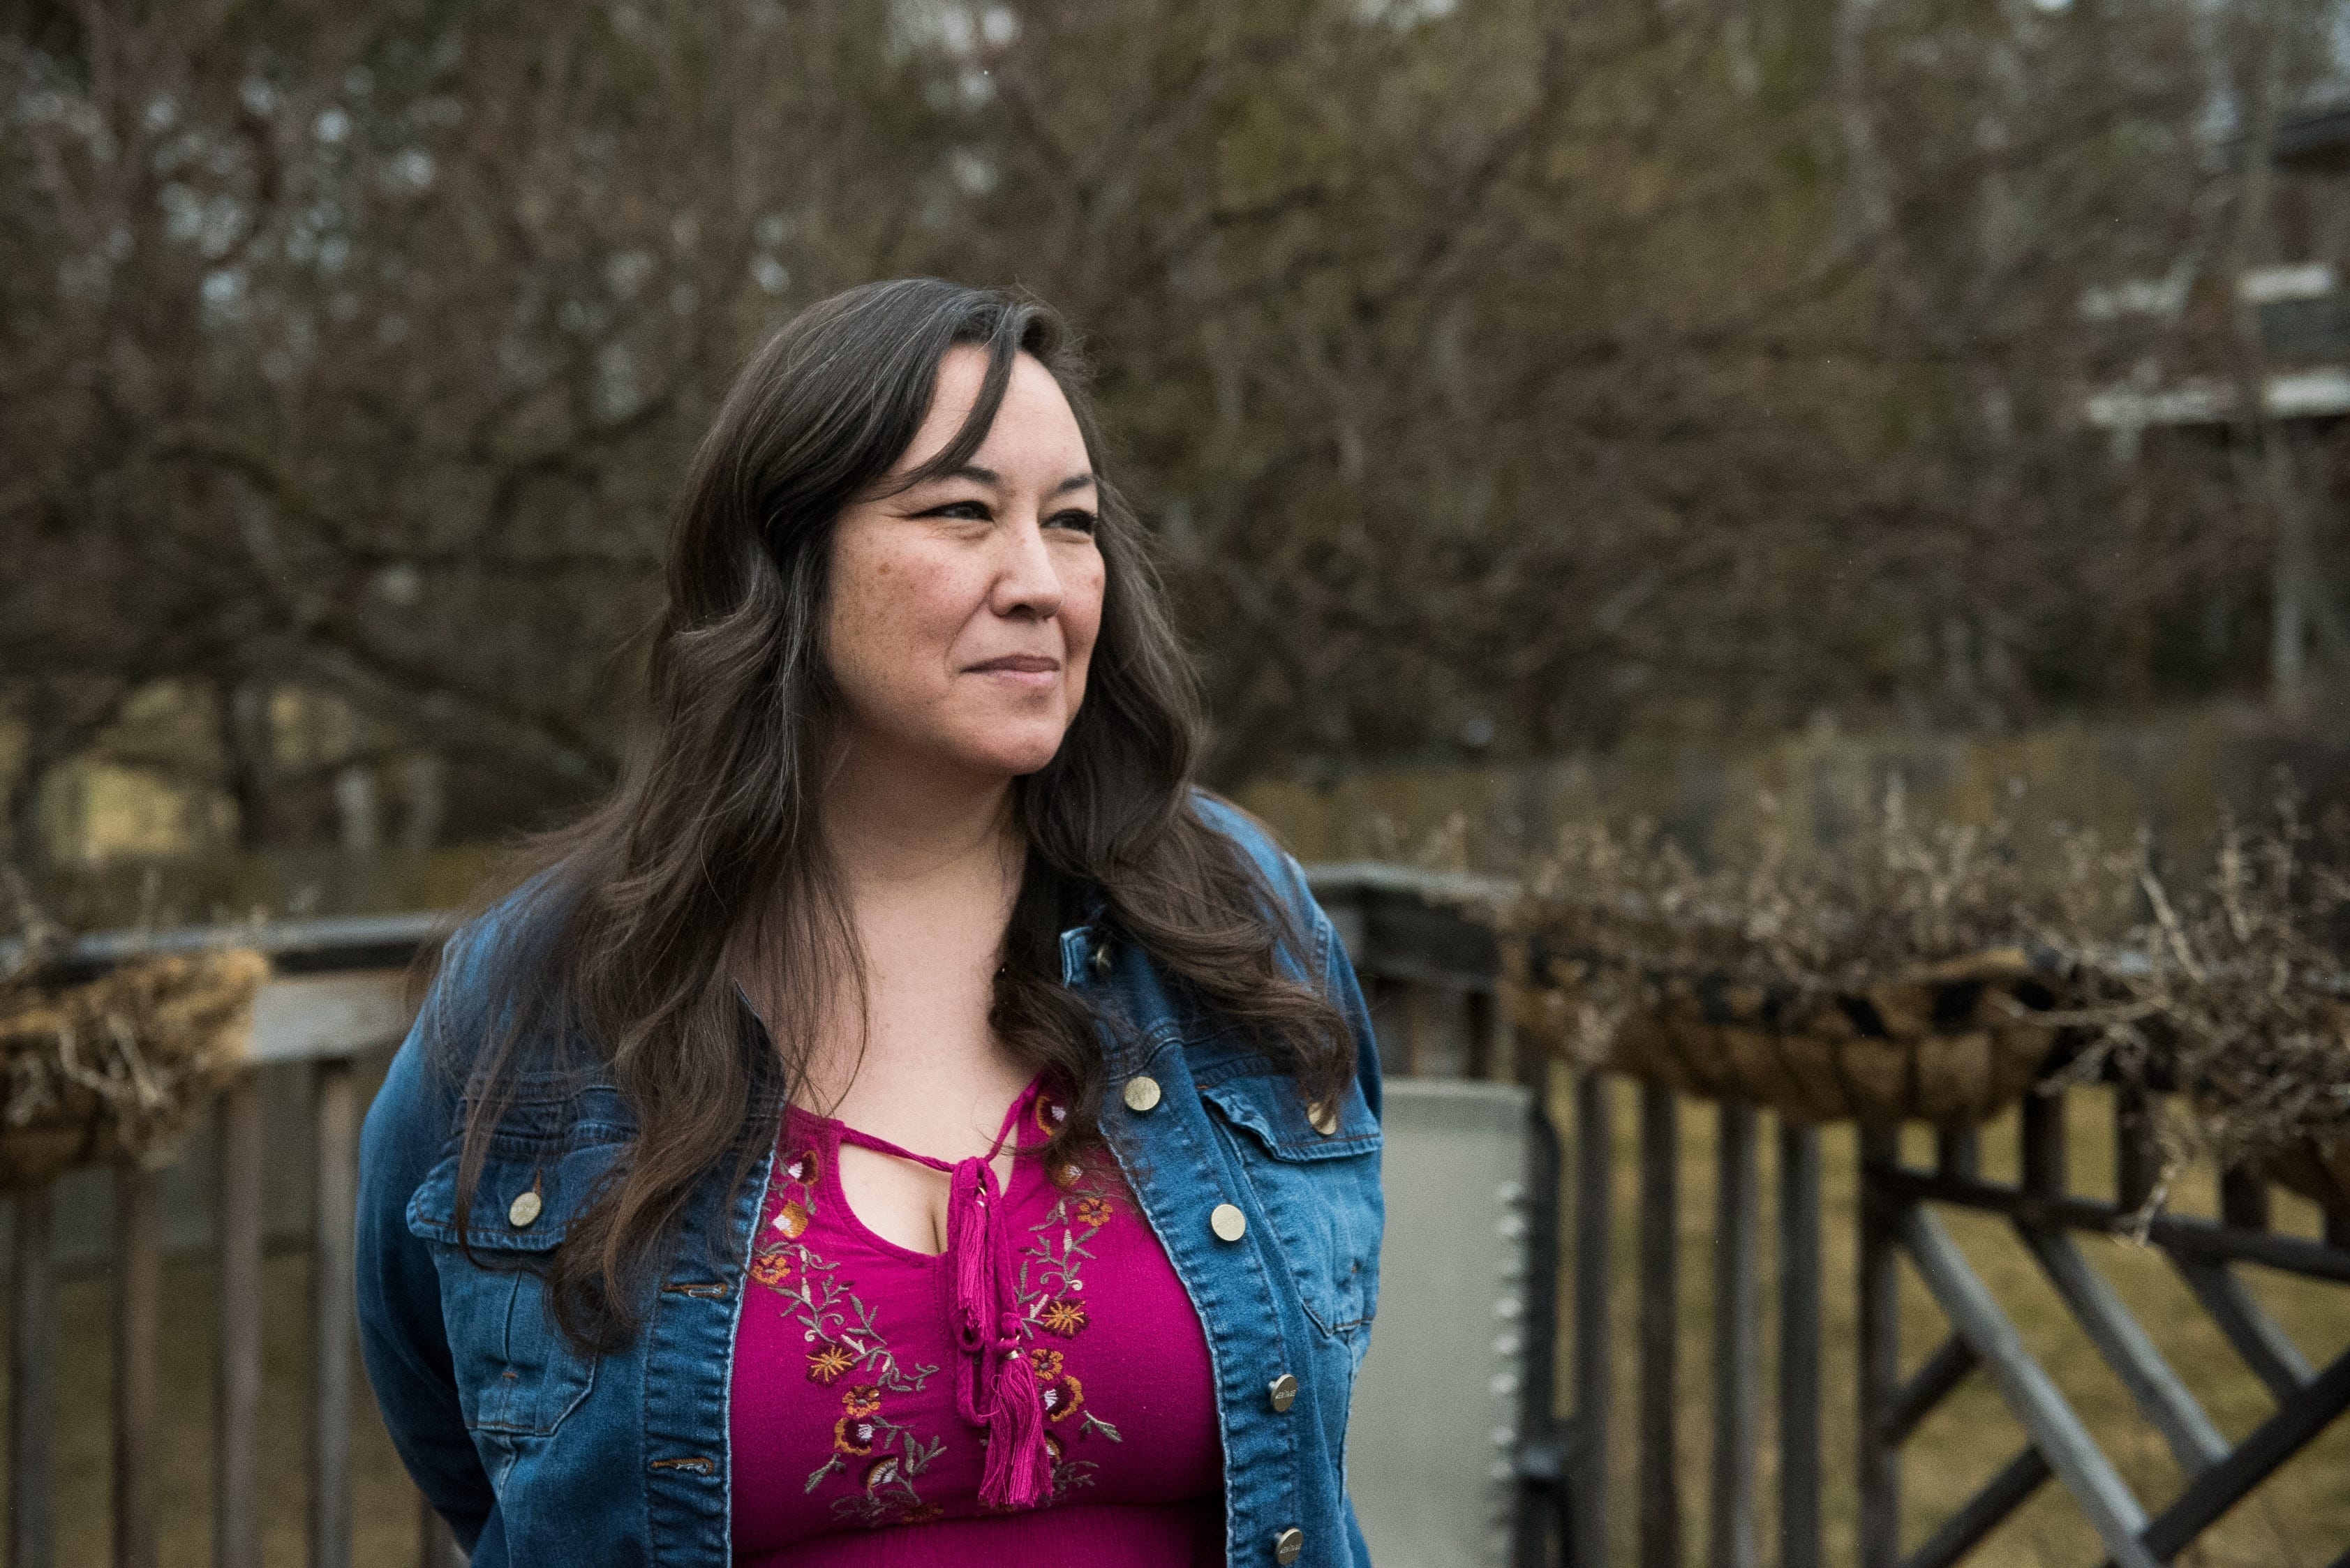 Ronalda Angasan says she suffered years of abuse by her ex-husband. She turned her experience into action by founding the Facebook group Alaska Natives Against Domestic Violence to assist other women in similar situations.